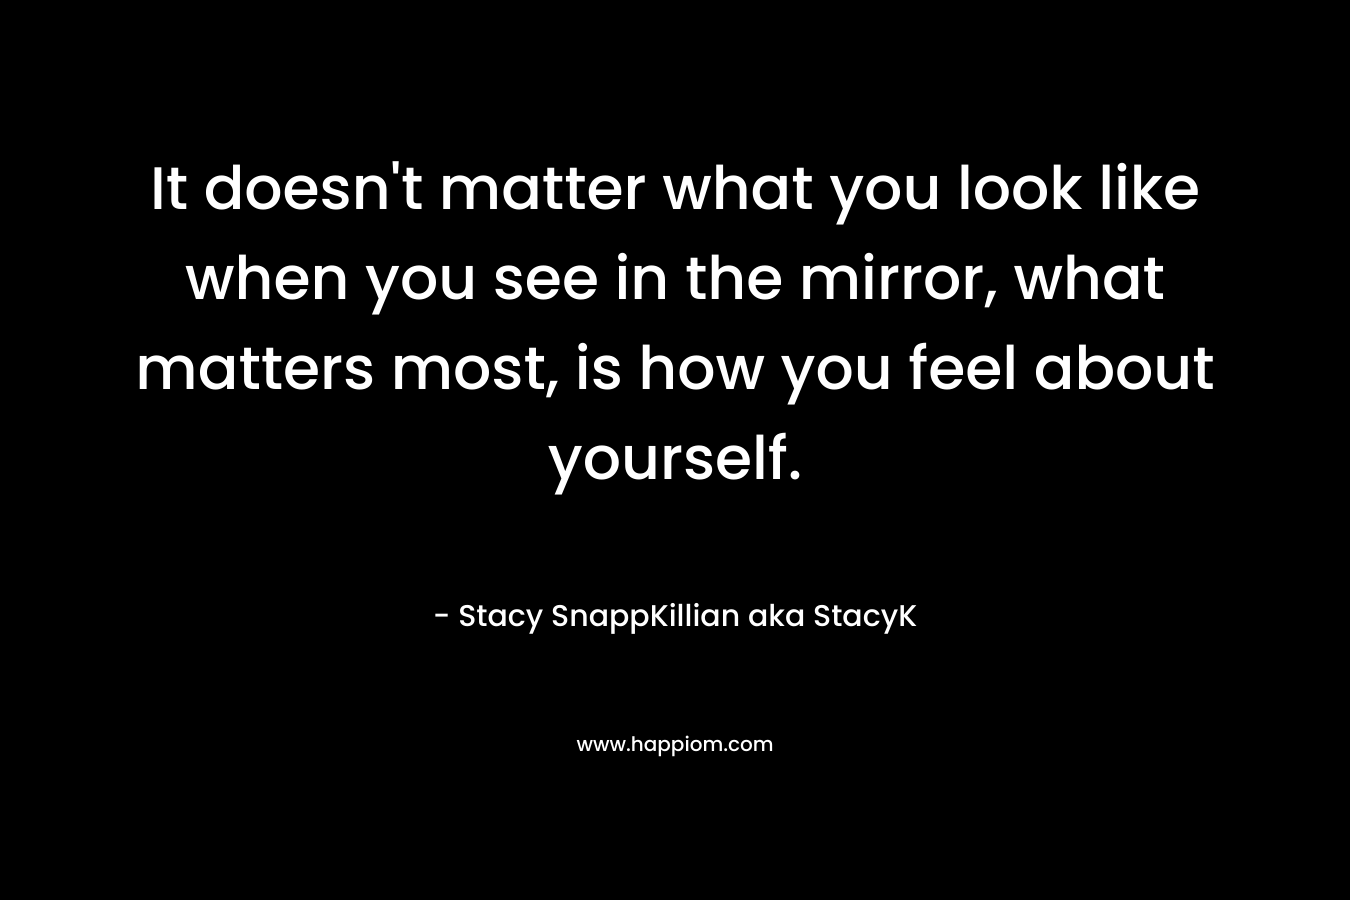 It doesn't matter what you look like when you see in the mirror, what matters most, is how you feel about yourself.